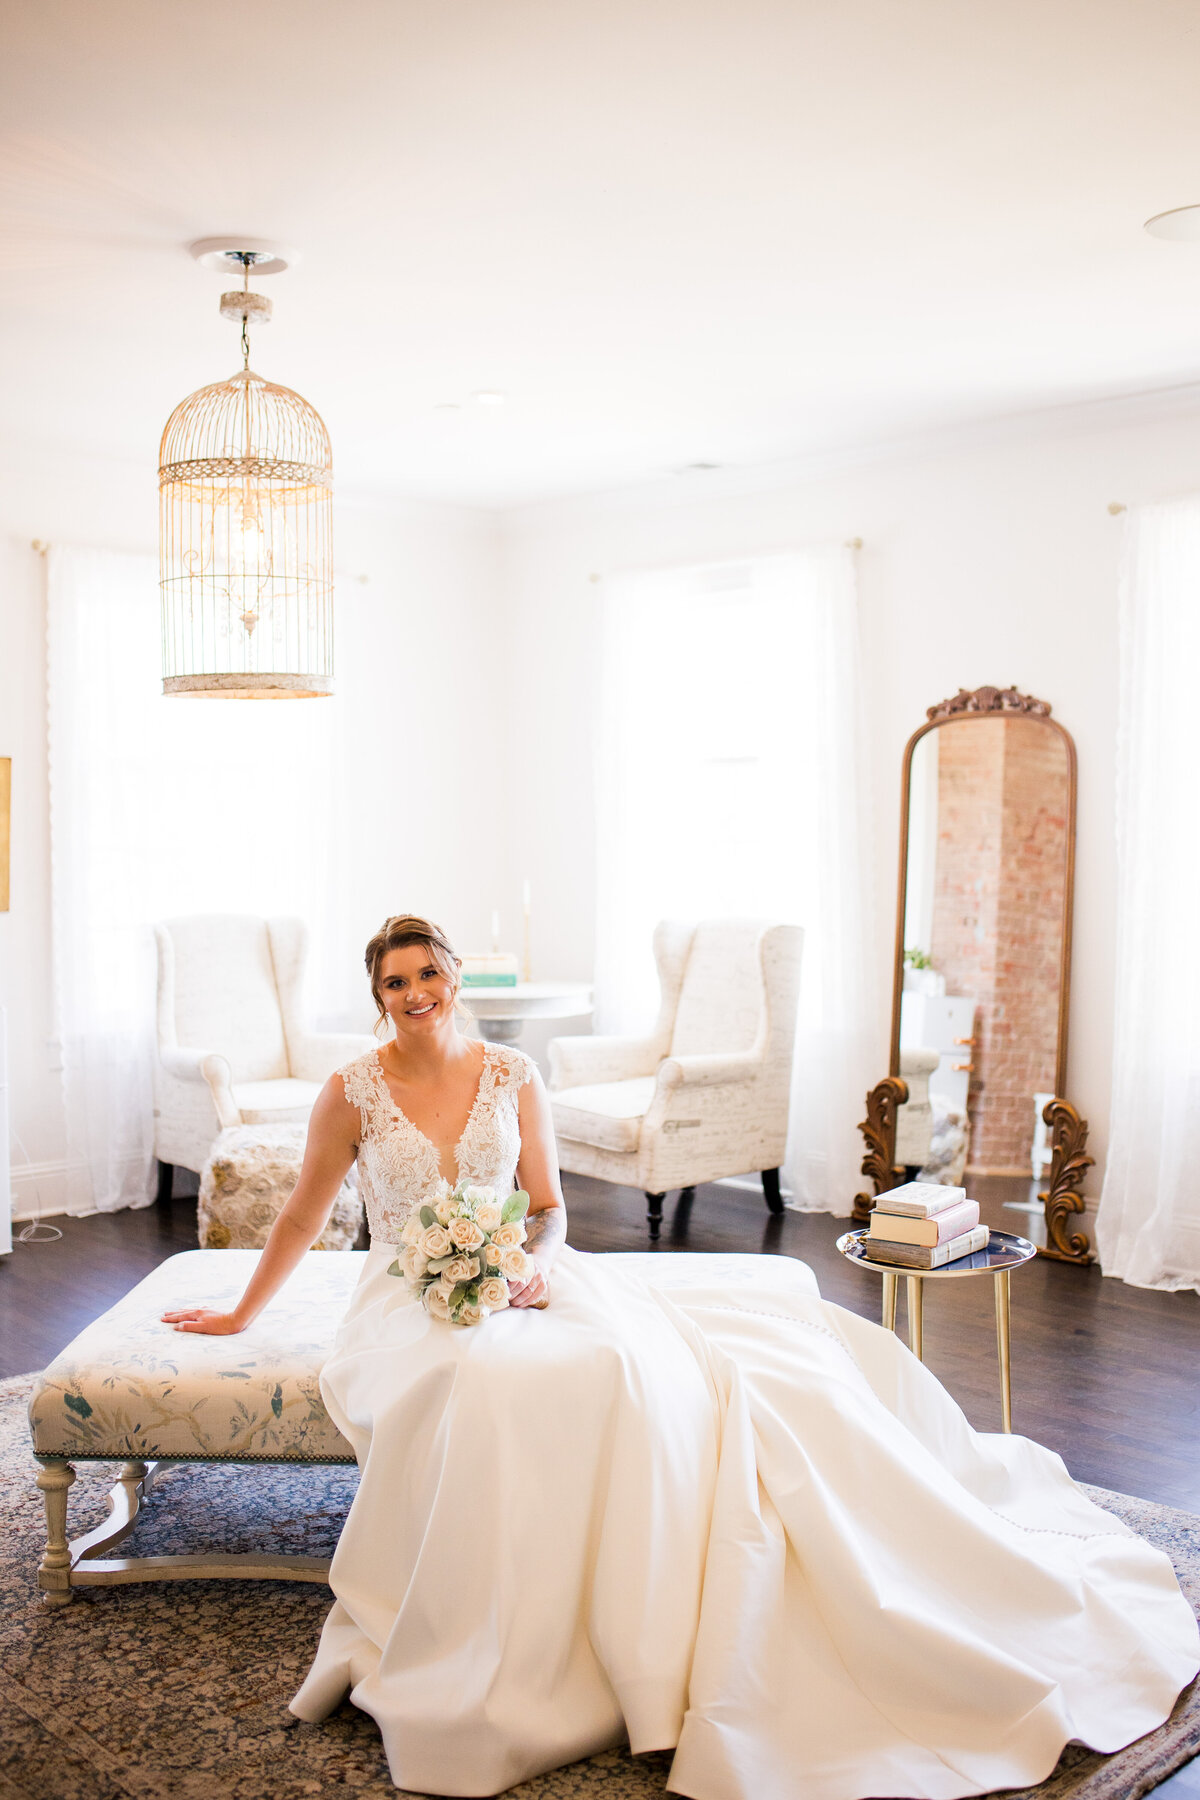 A wide angle shot of a bride smiling at the camera in an elegant getting ready space.